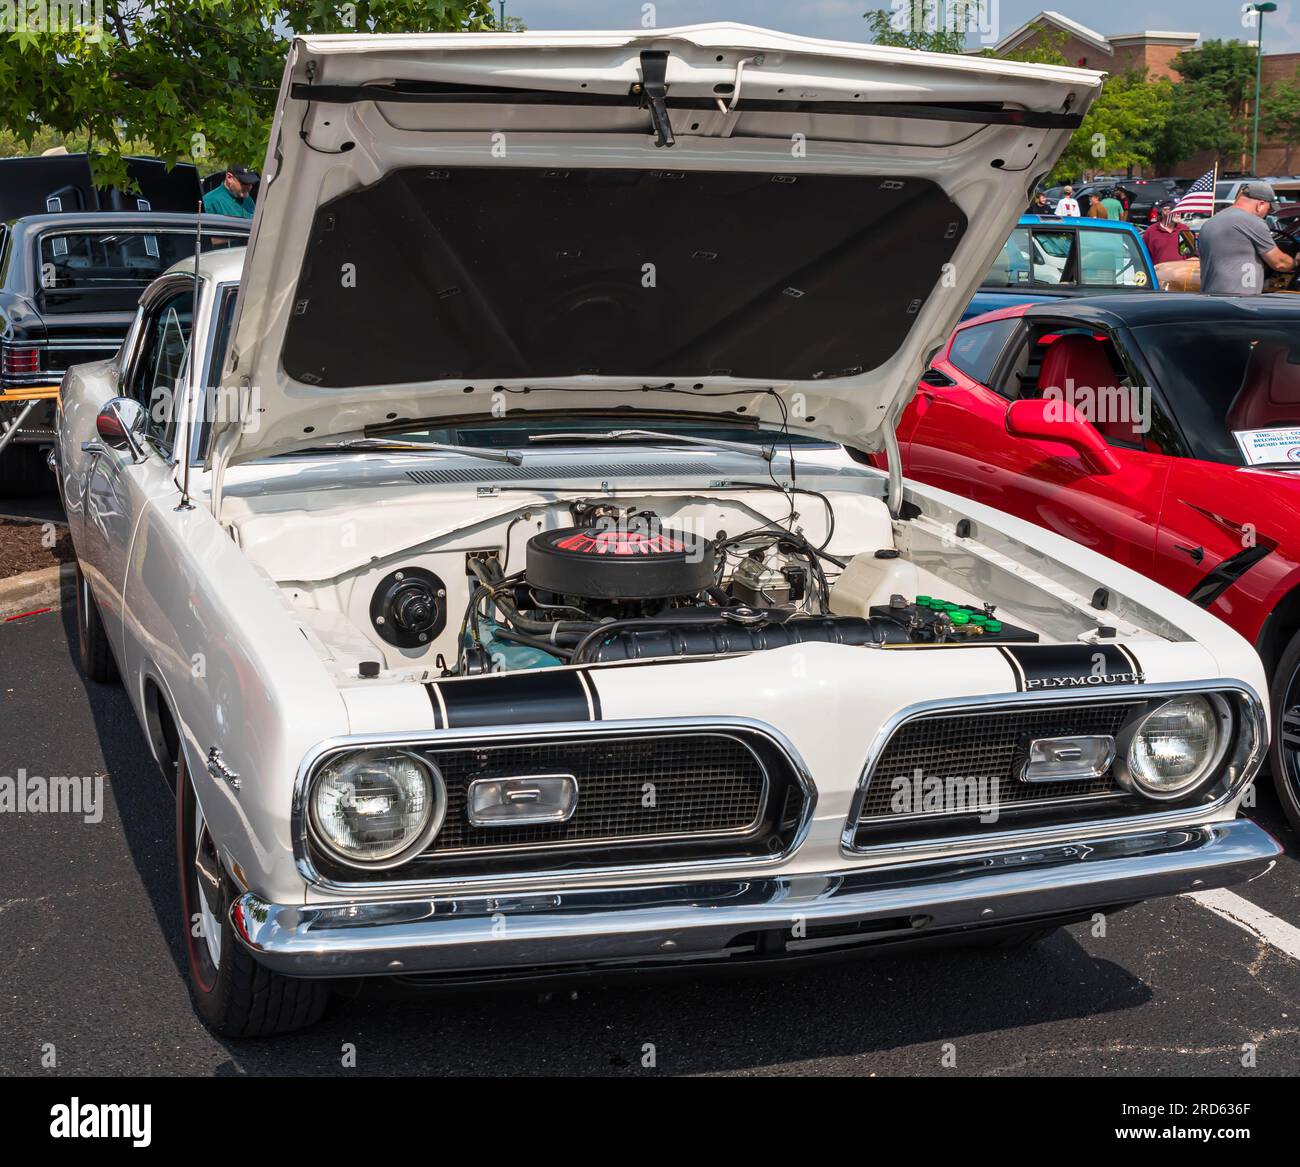 A 1965 Plymouth Barracuda on display at a car show in Homestead, Pennsylvania, USA Stock Photo